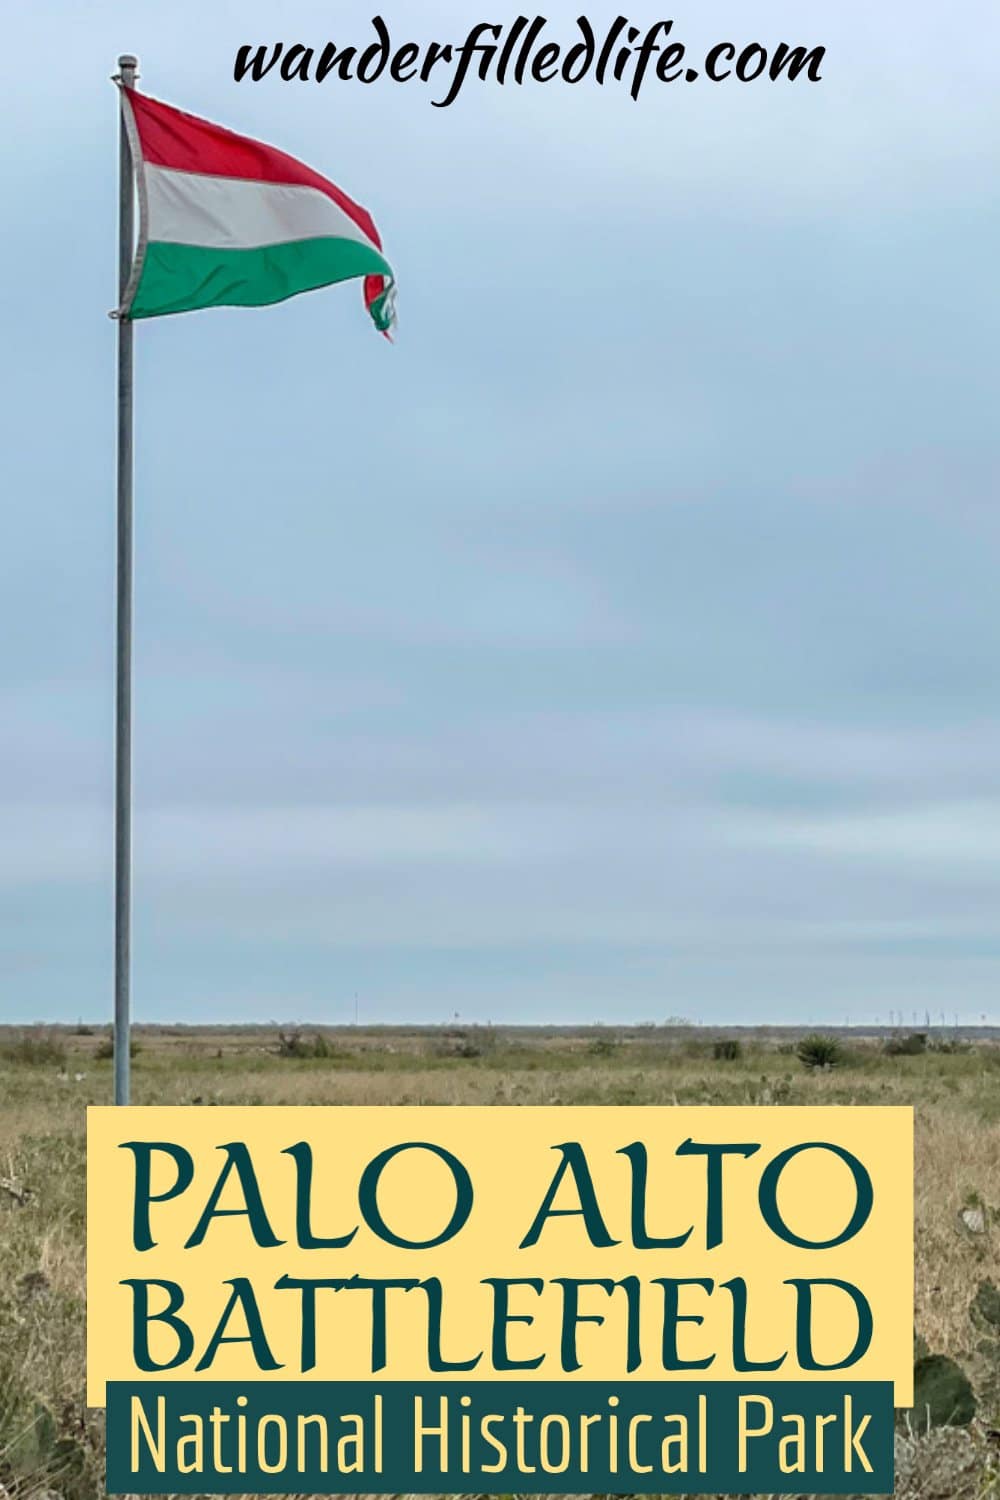 Palo Alto Battlefield National Historical Park offers an in-depth look at the first battles of the Mexican-American War and some unusual wildlife!